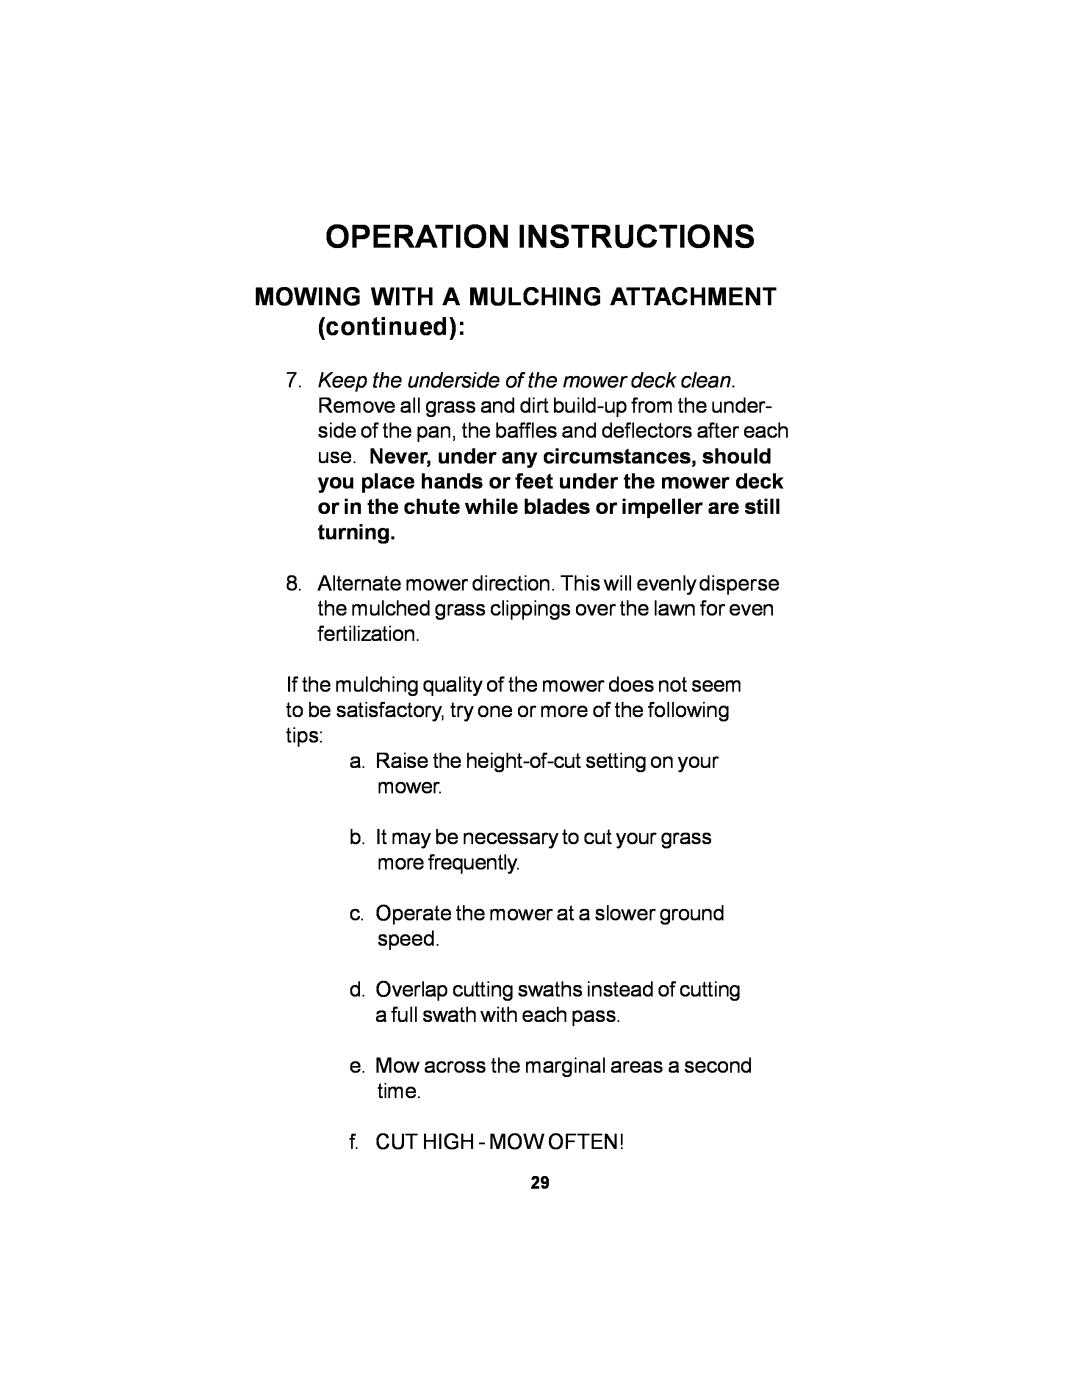 Dixon 12881-106 manual MOWING WITH A MULCHING ATTACHMENT continued, Operation Instructions 